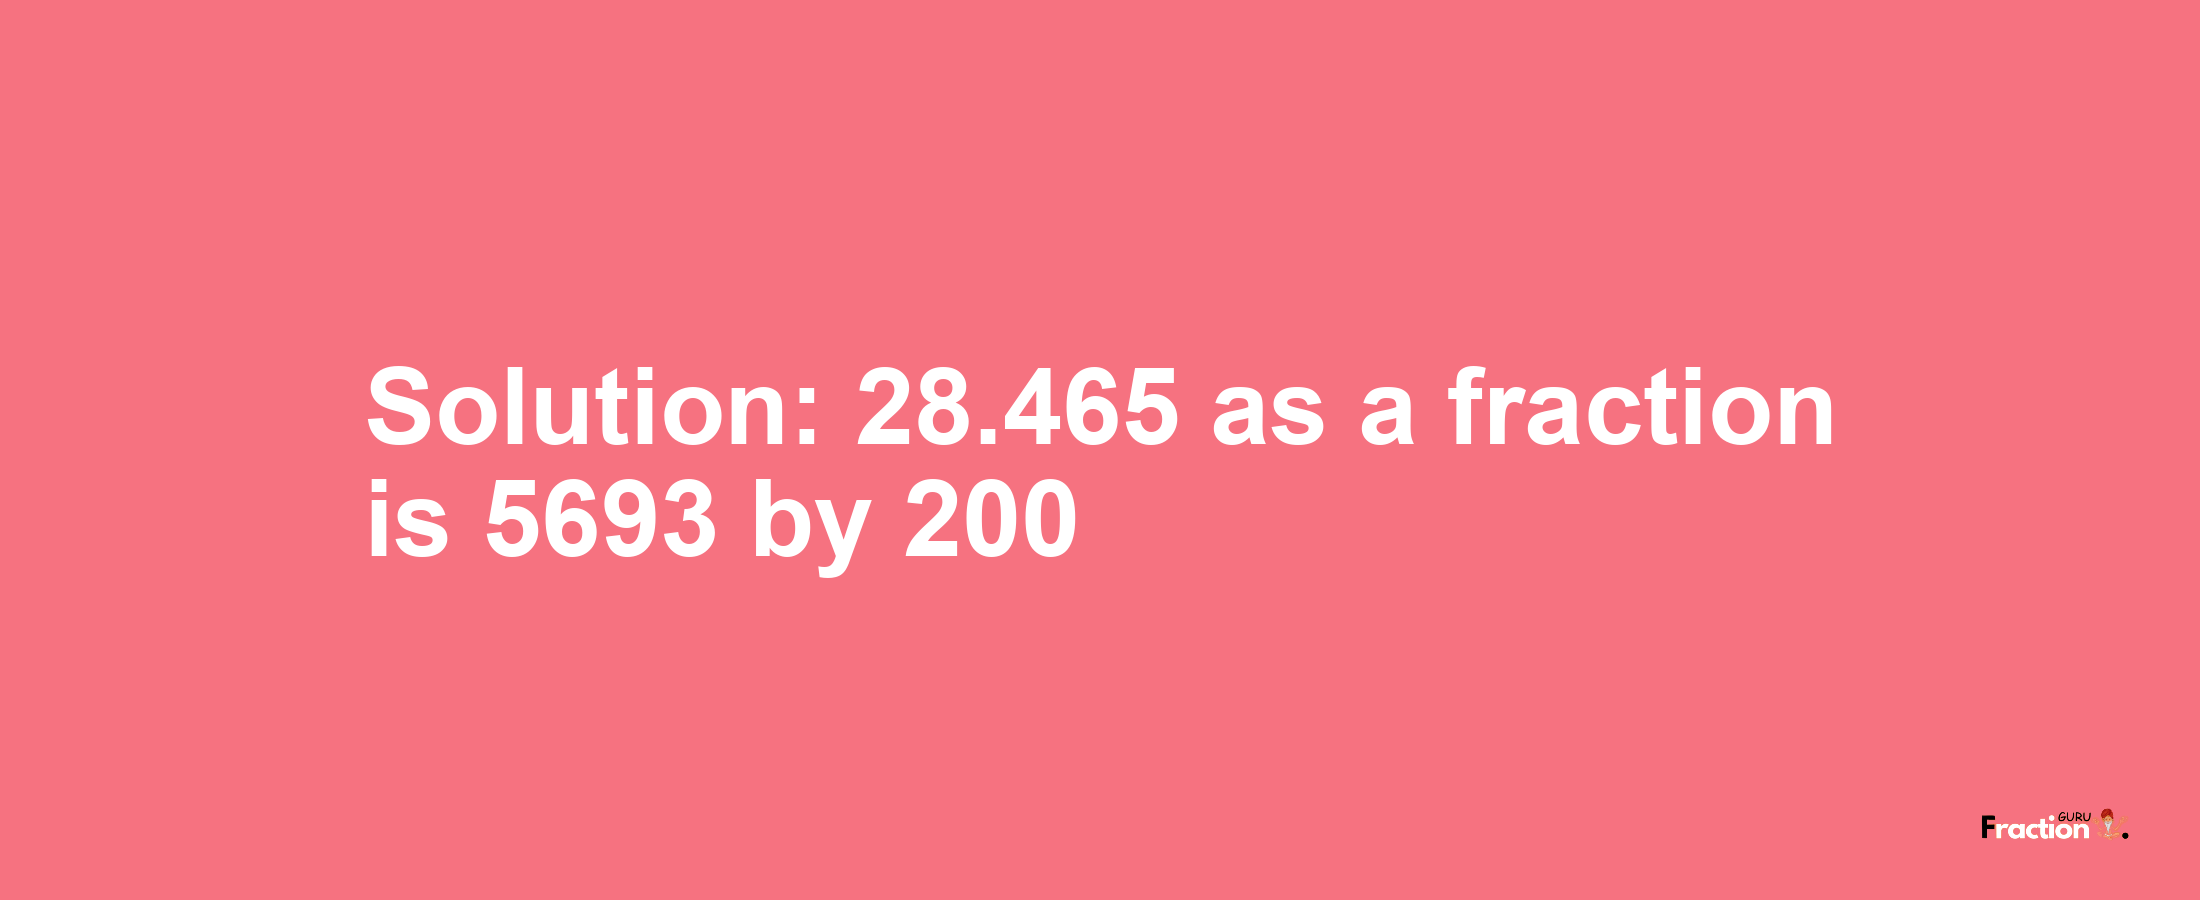 Solution:28.465 as a fraction is 5693/200